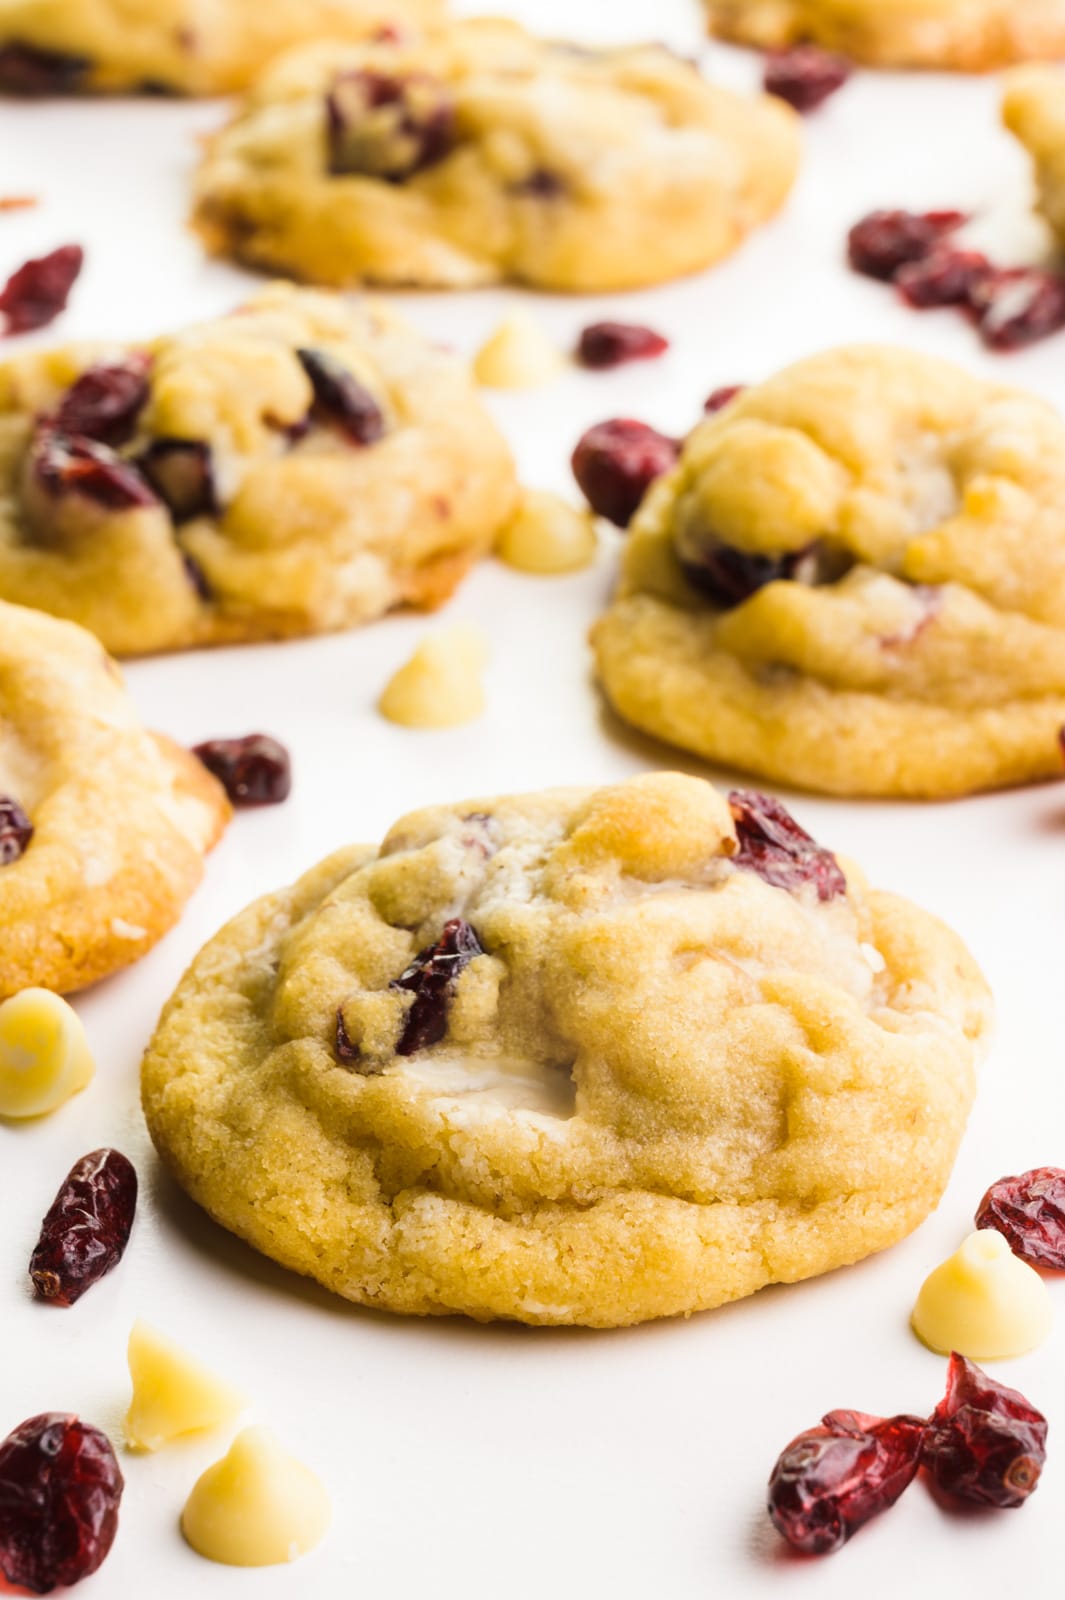 Cranberry Chocolate Chip Cookies - Namely Marly